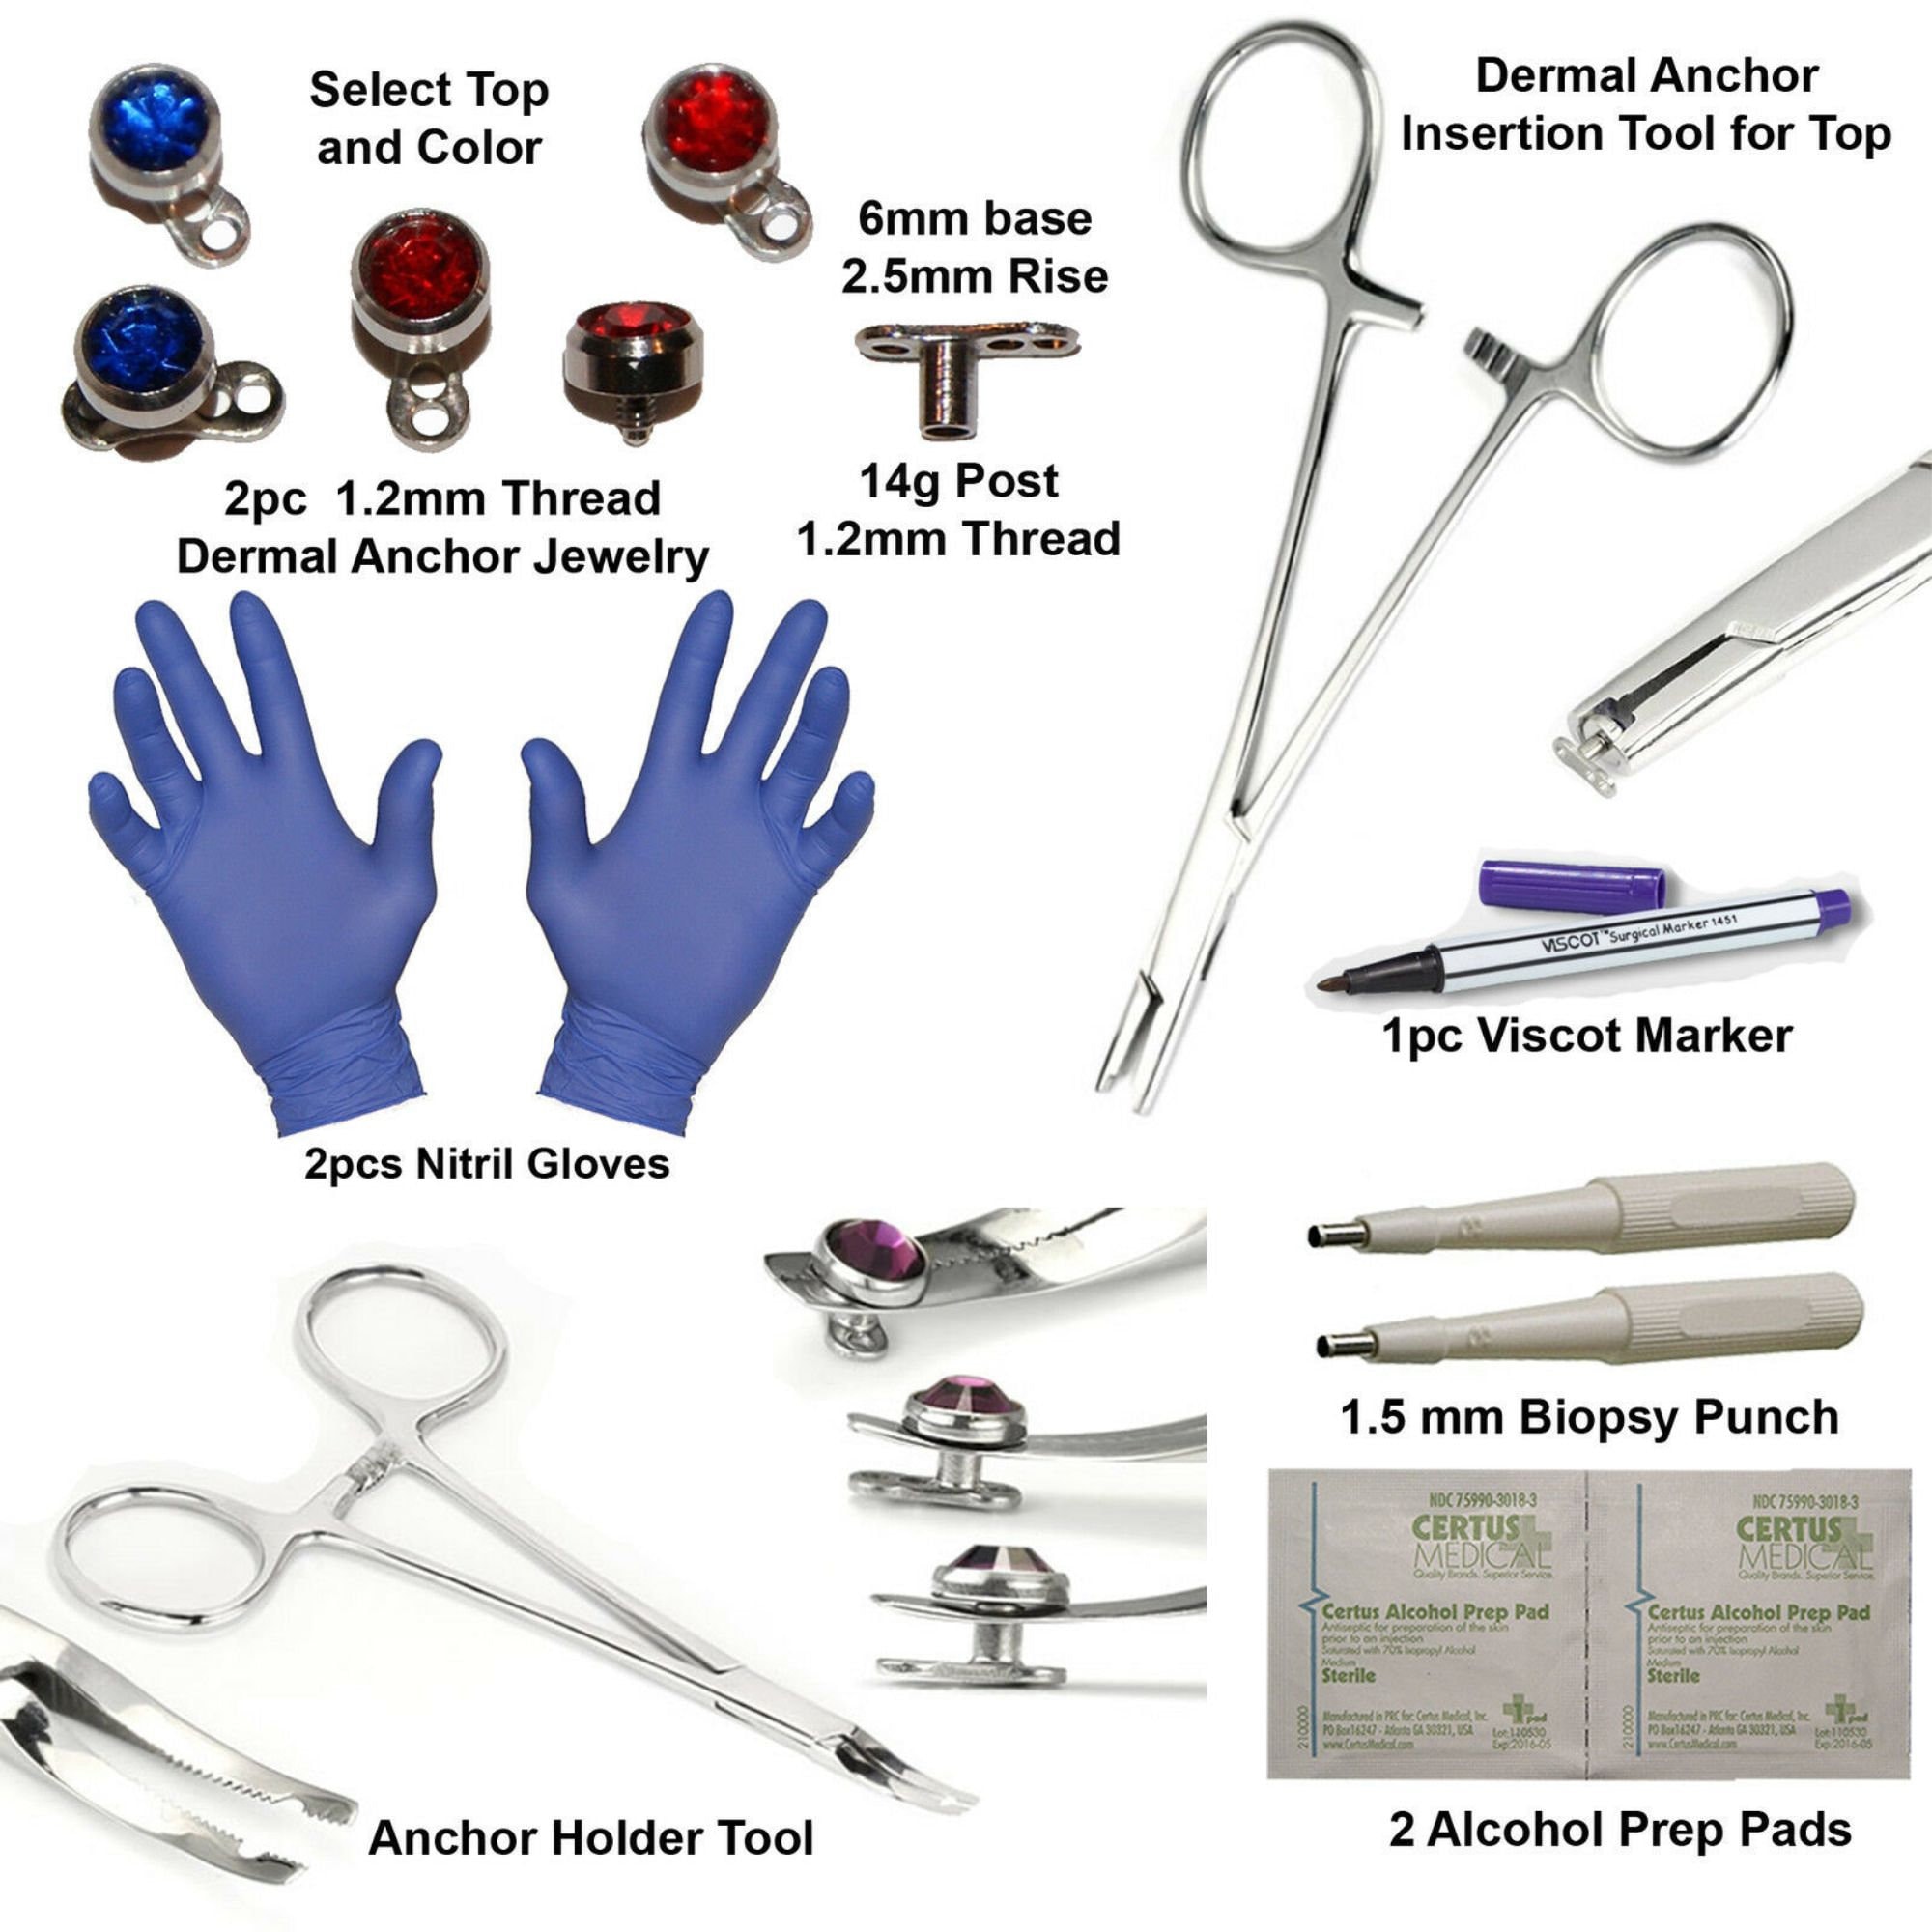 Micro Insertion Surface Anchor Tools Dermal Jewelry 